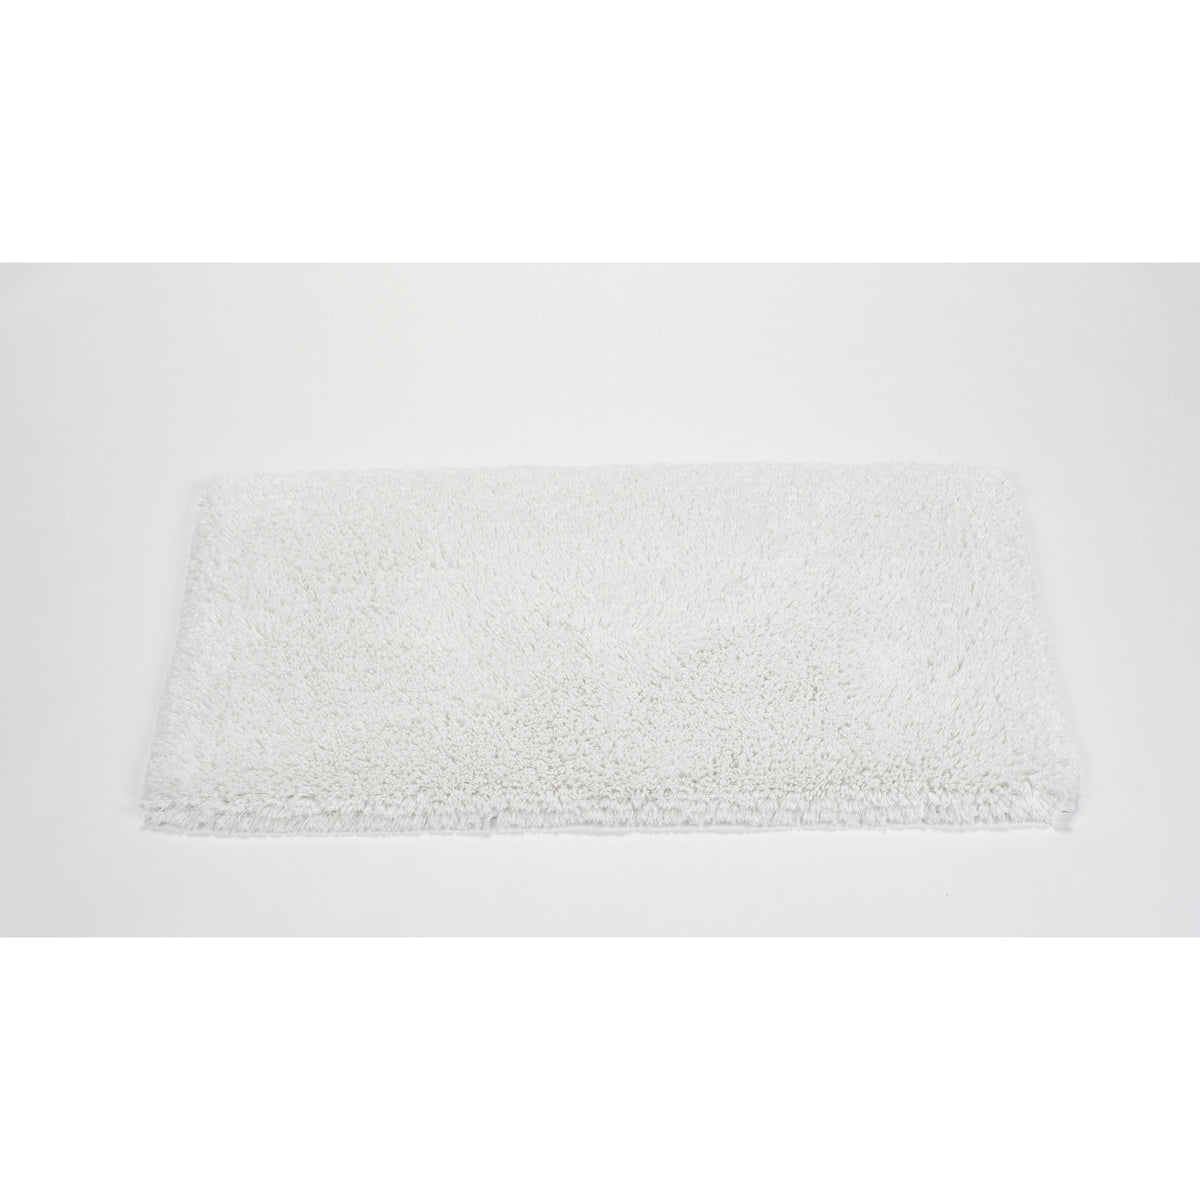 23x23 Bath Rug - Home Boutique of Greenwich CT